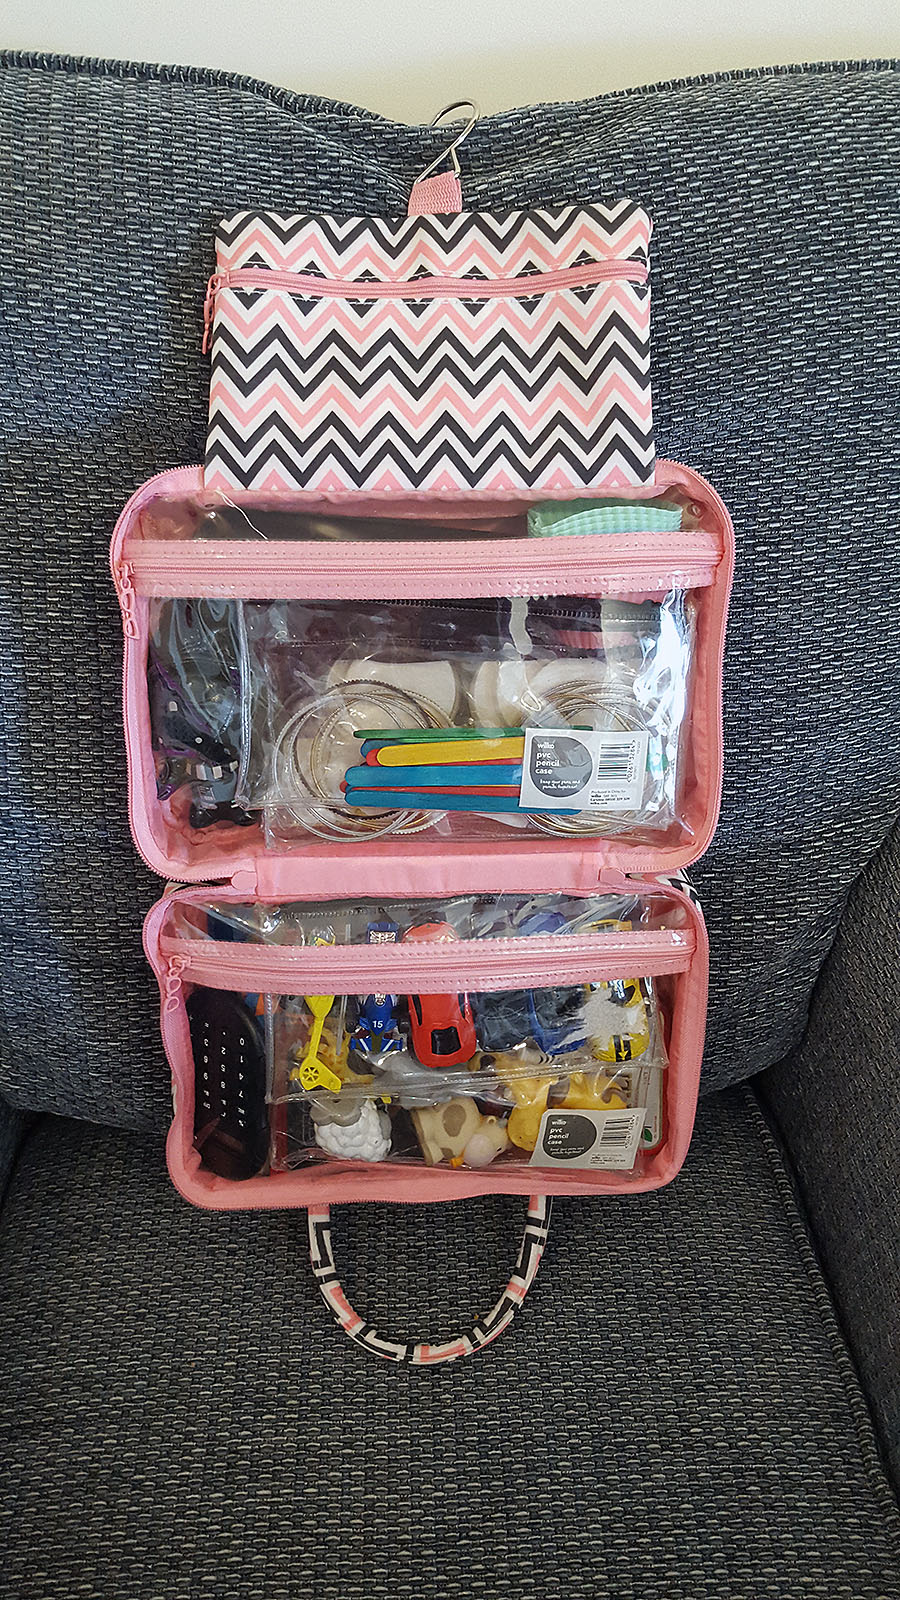 Airplane busy bag for toddlers (two-year-old edition)